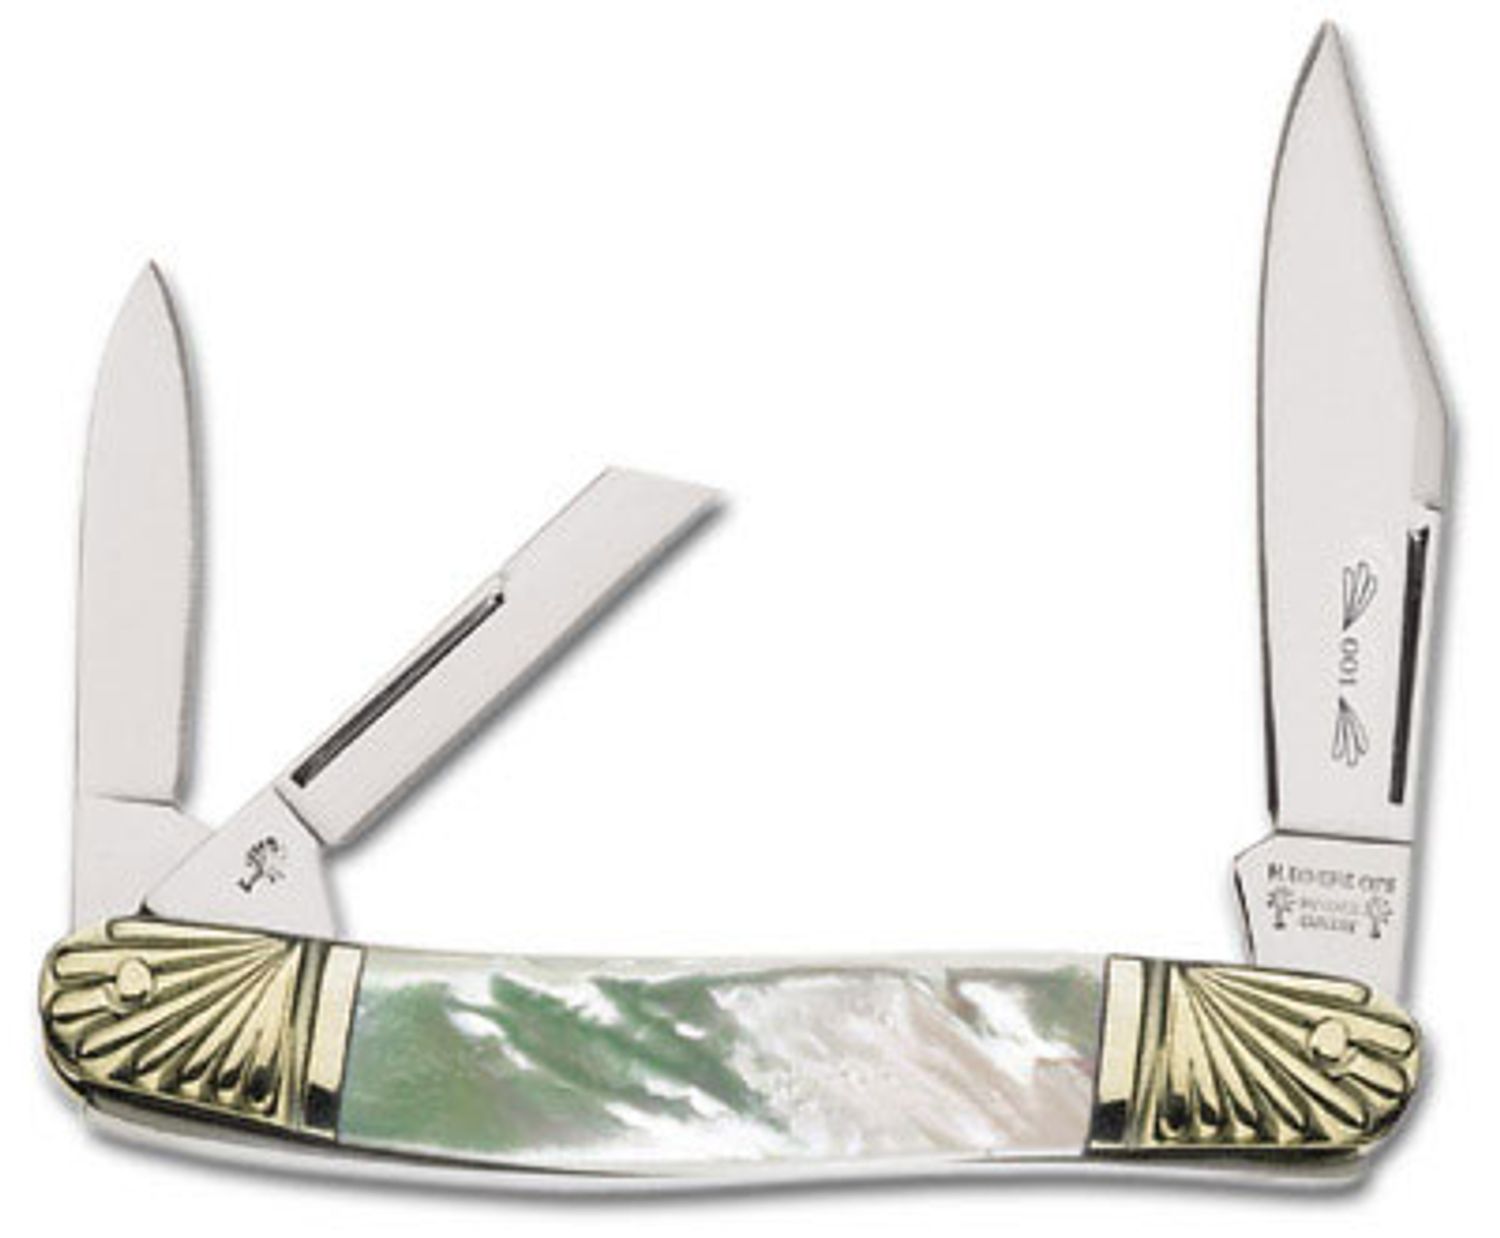 Boker Double Tree Three Blade Whittler Mother Pearl Handle 3.5 Closed -  KnifeCenter - BO28024DT - Discontinued